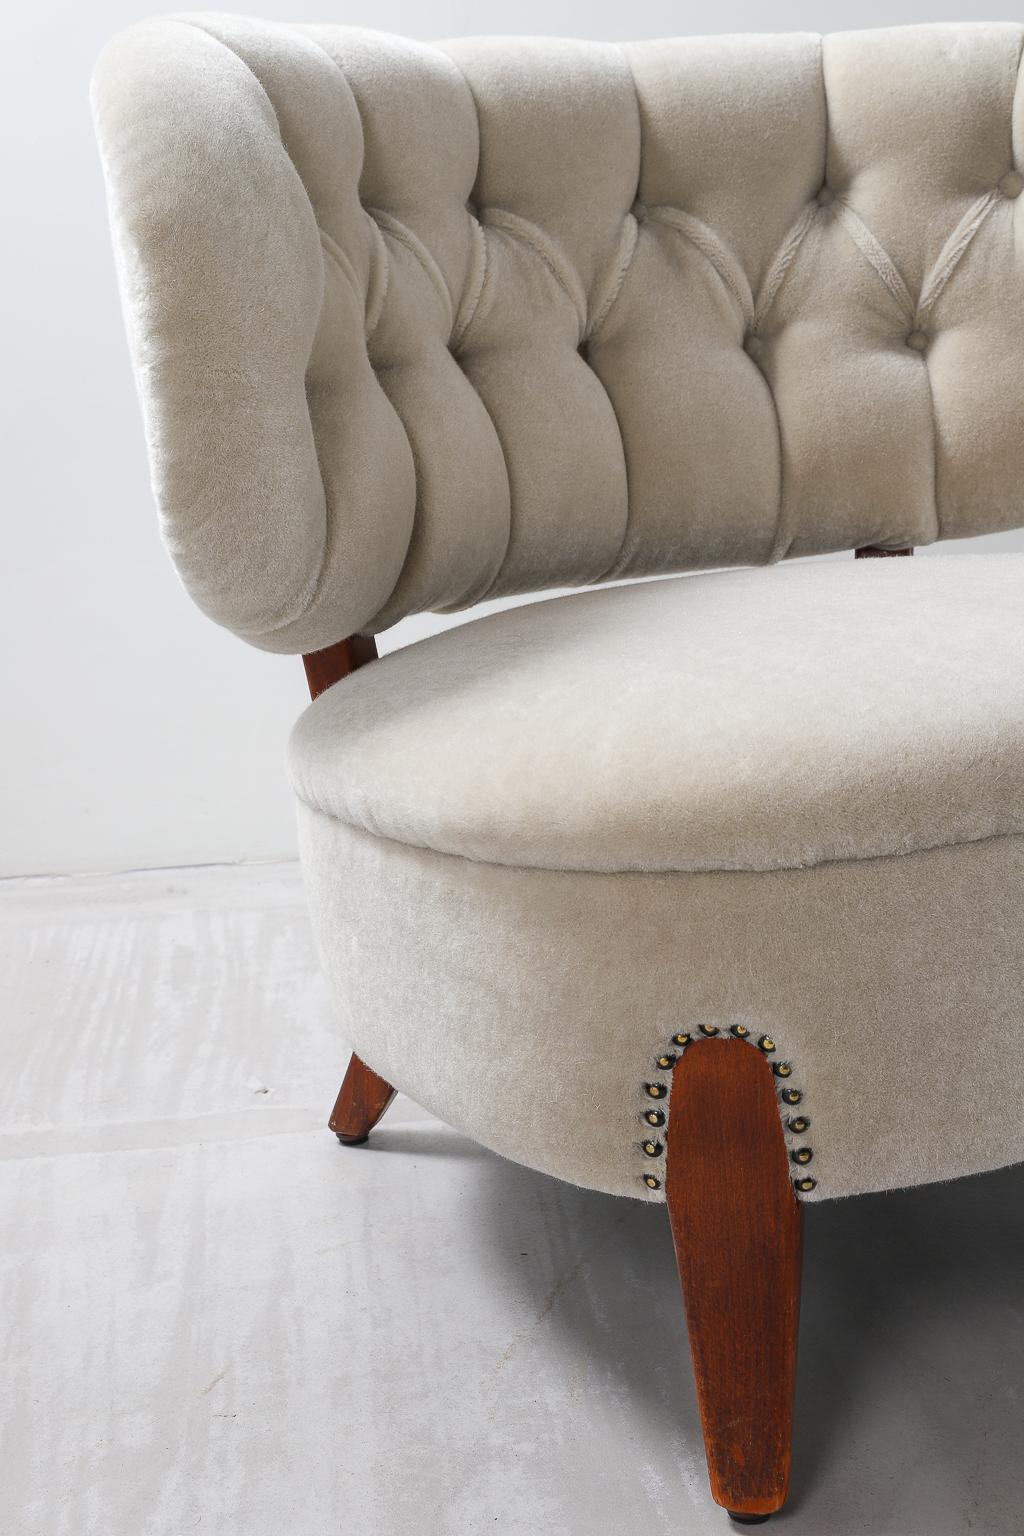 Armchair by Otto Schulz 1930s-1940s Upholstered in Bespoke Mohair 3